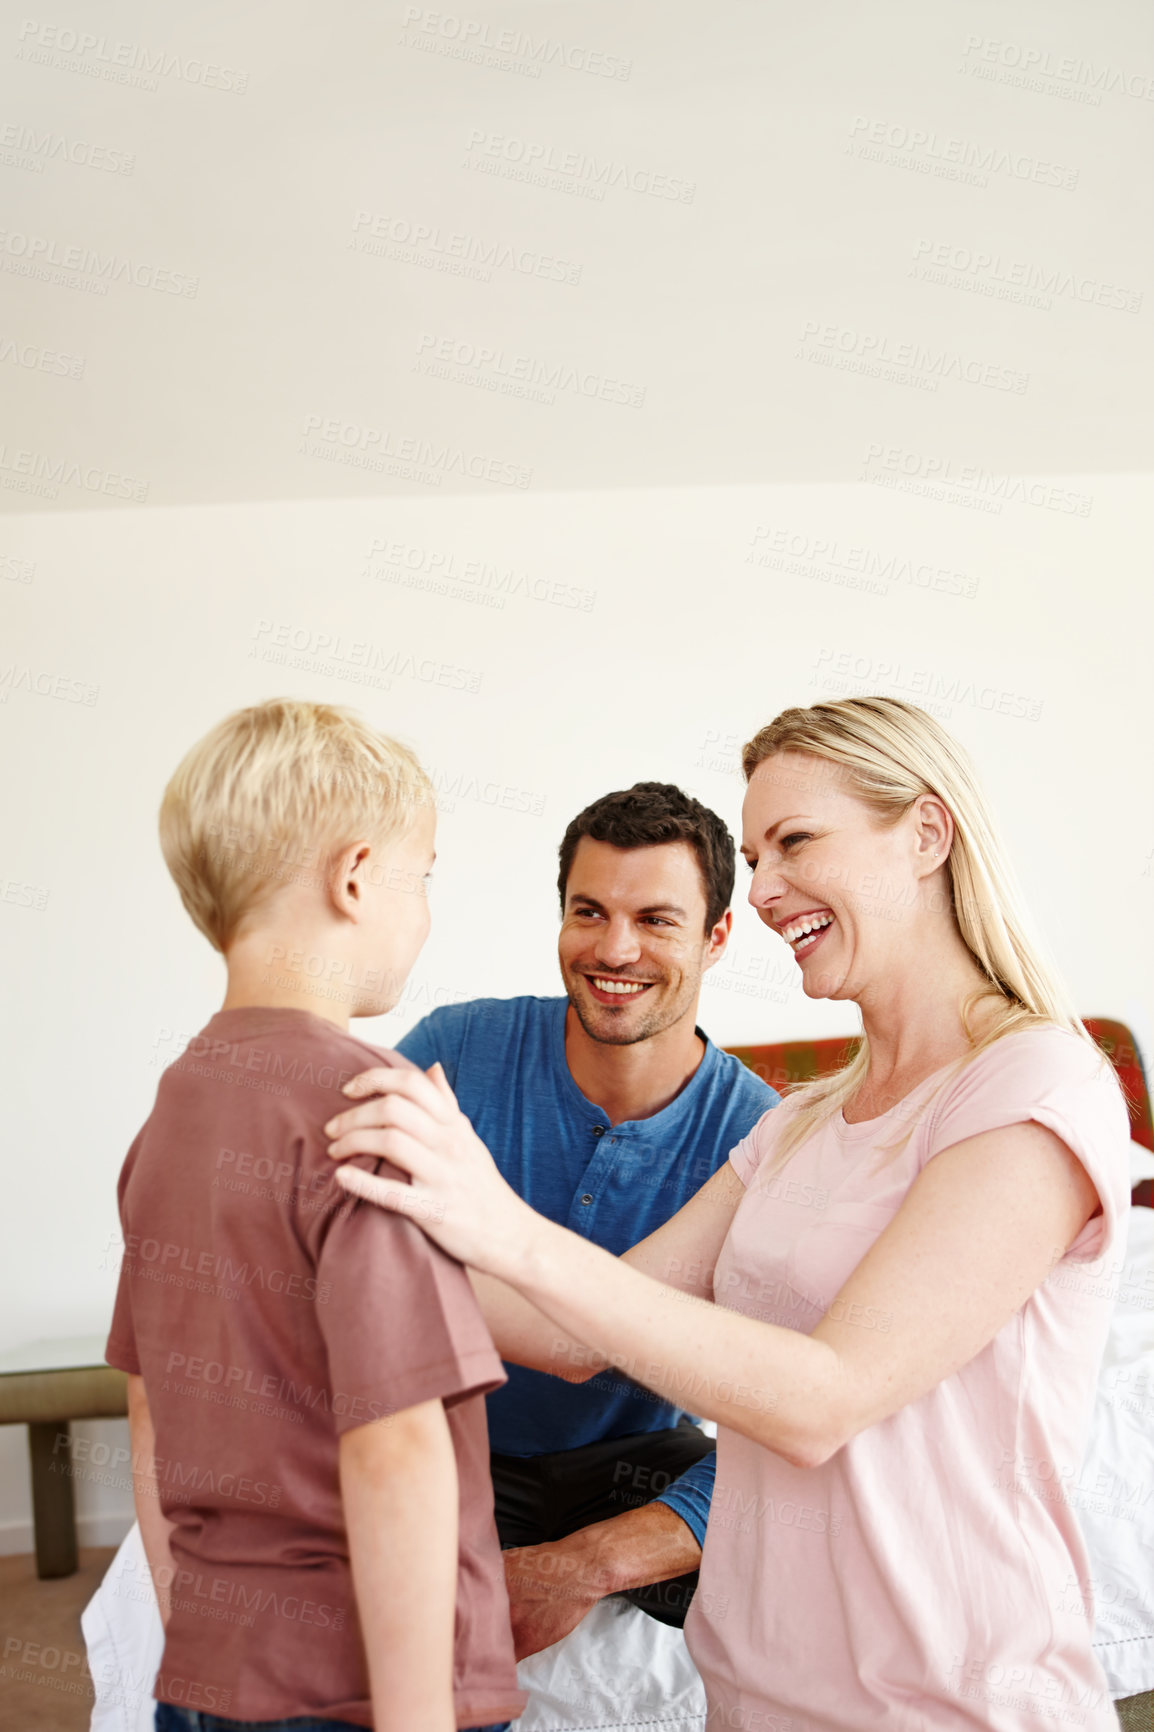 Buy stock photo A happy mother and father doting over their son 